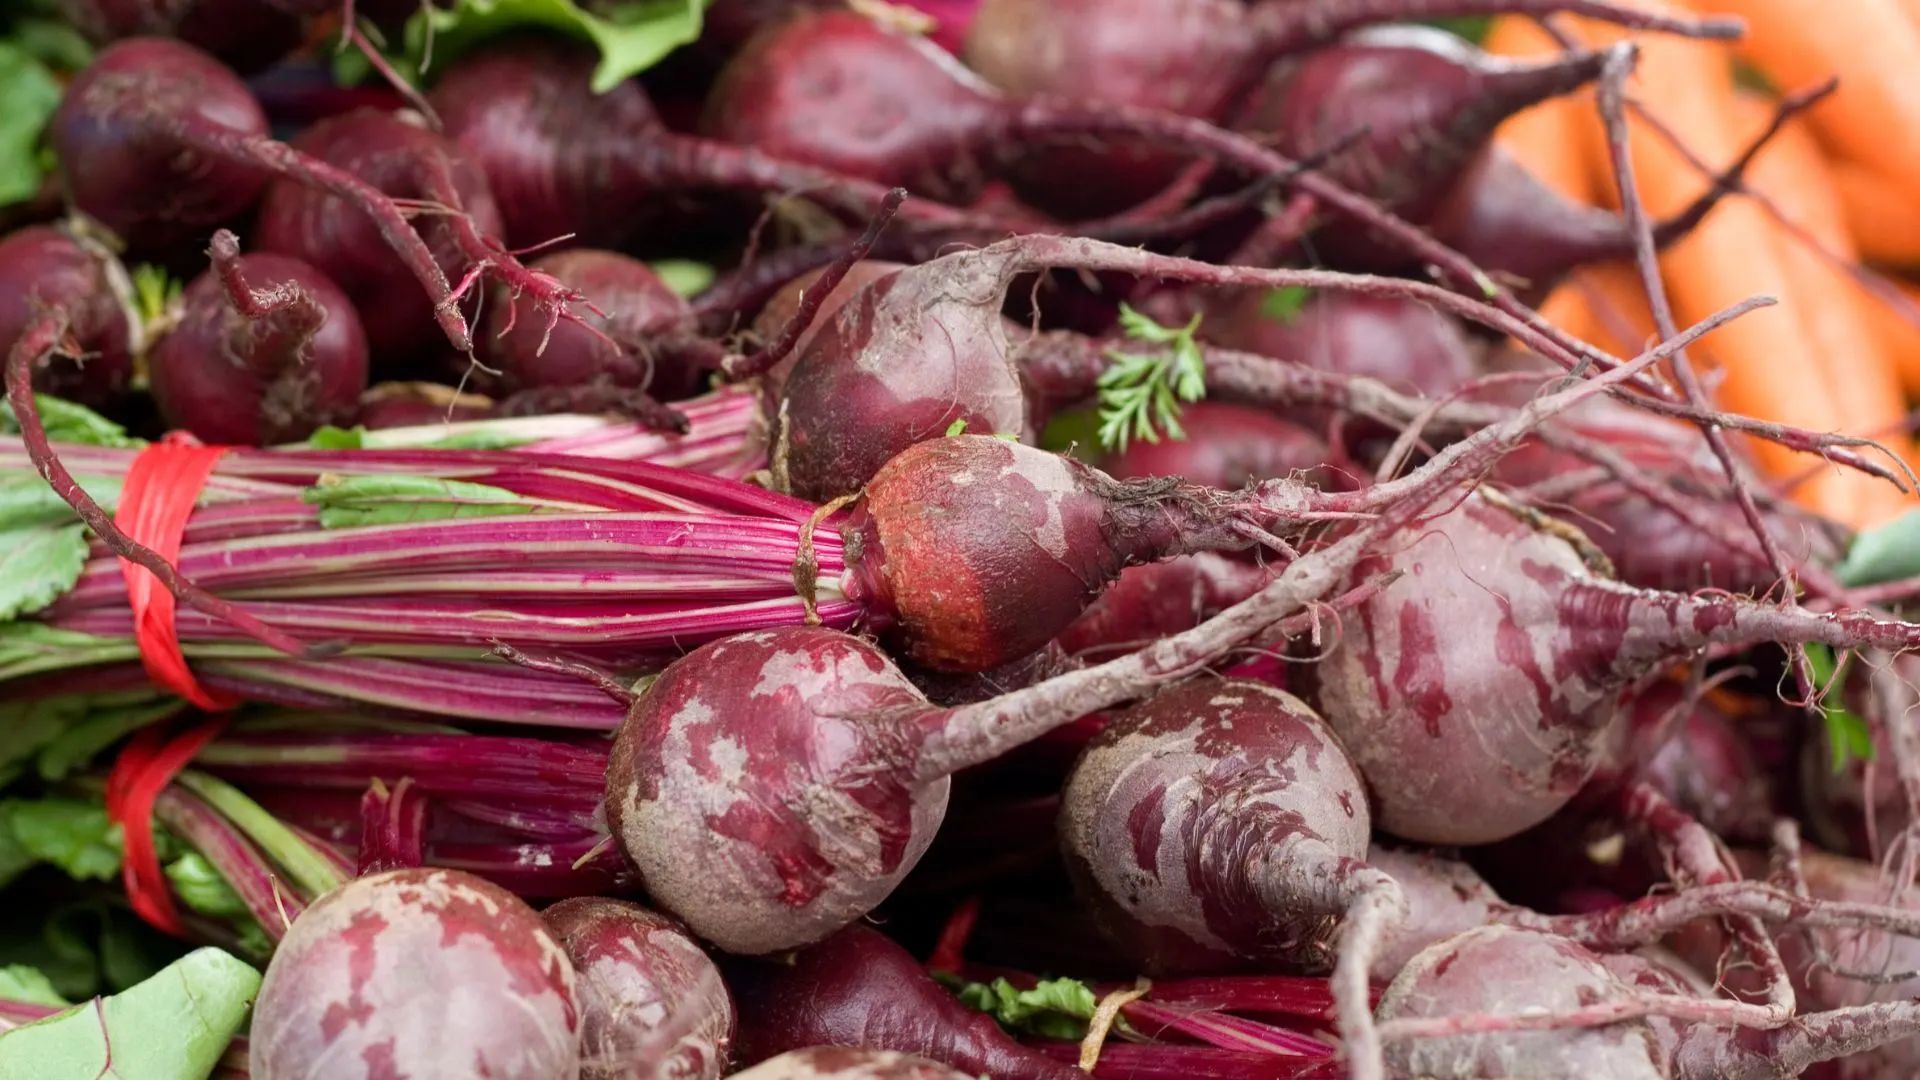 photo of beets